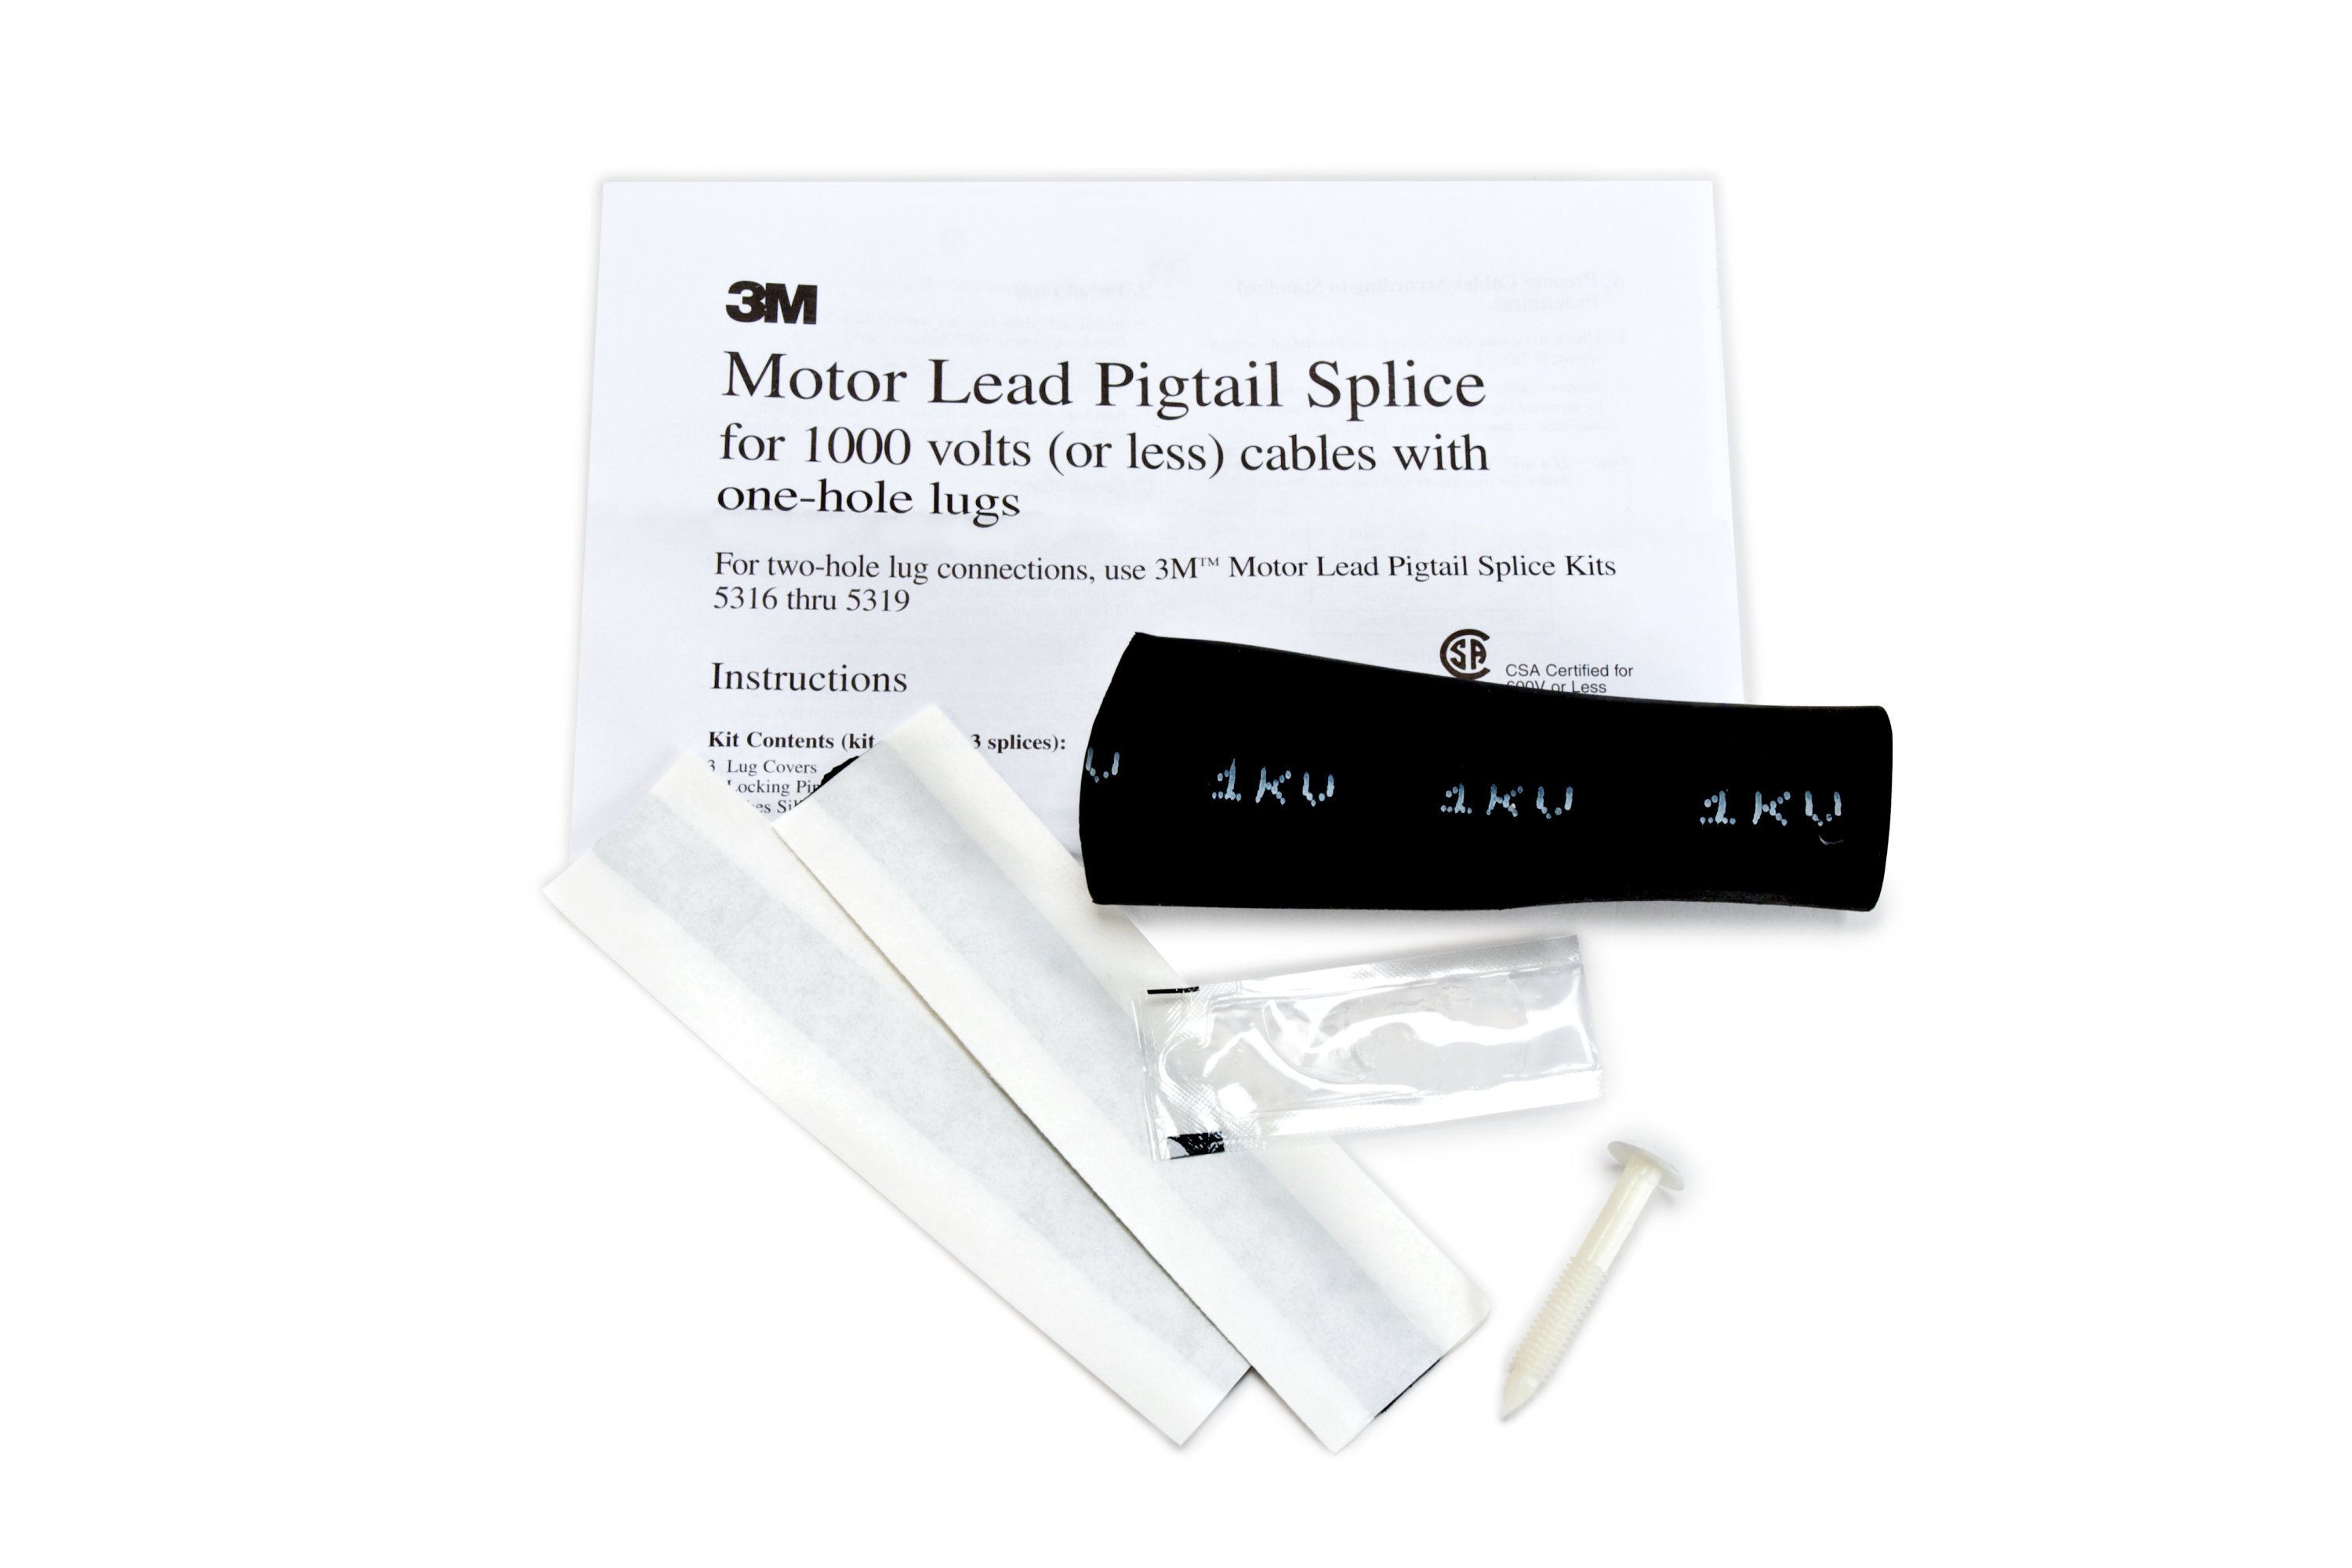 3M™ Motor Lead Pigtail Splicing Kits 5300 Series are designed for splicing motor lead cables to incoming feeder cables, including the accommodation of pigtail (stub) connections at 1000 volts and less. The splice’s main component, the slip-on lug cover, is made from EPDM rubber. Mastic strips are used for the moisture seal.These kits are designed to be used with copper compression, one-hole lugs. After being crimped onto the cables, the lugs are bolted together in a pigtail configuration, then insulated and sealed with the 3M Motor Lead Splicing Kit. Each kit makes three splices and contains the necessary materials (except lugs) needed to make three splices. The lugs must be purchased separately. 3M™ Scotchlok™ Copper Compression Lugs 30000 Series, or other UL listed copper lugs, can be used.Kit contents include:• (3) Pigtail lug covers• (3) Mastic sealing strips• (3) Locking pins (kits 5302–5304 only)• (3) Tubes of silicone grease• (1) Instruction sheet